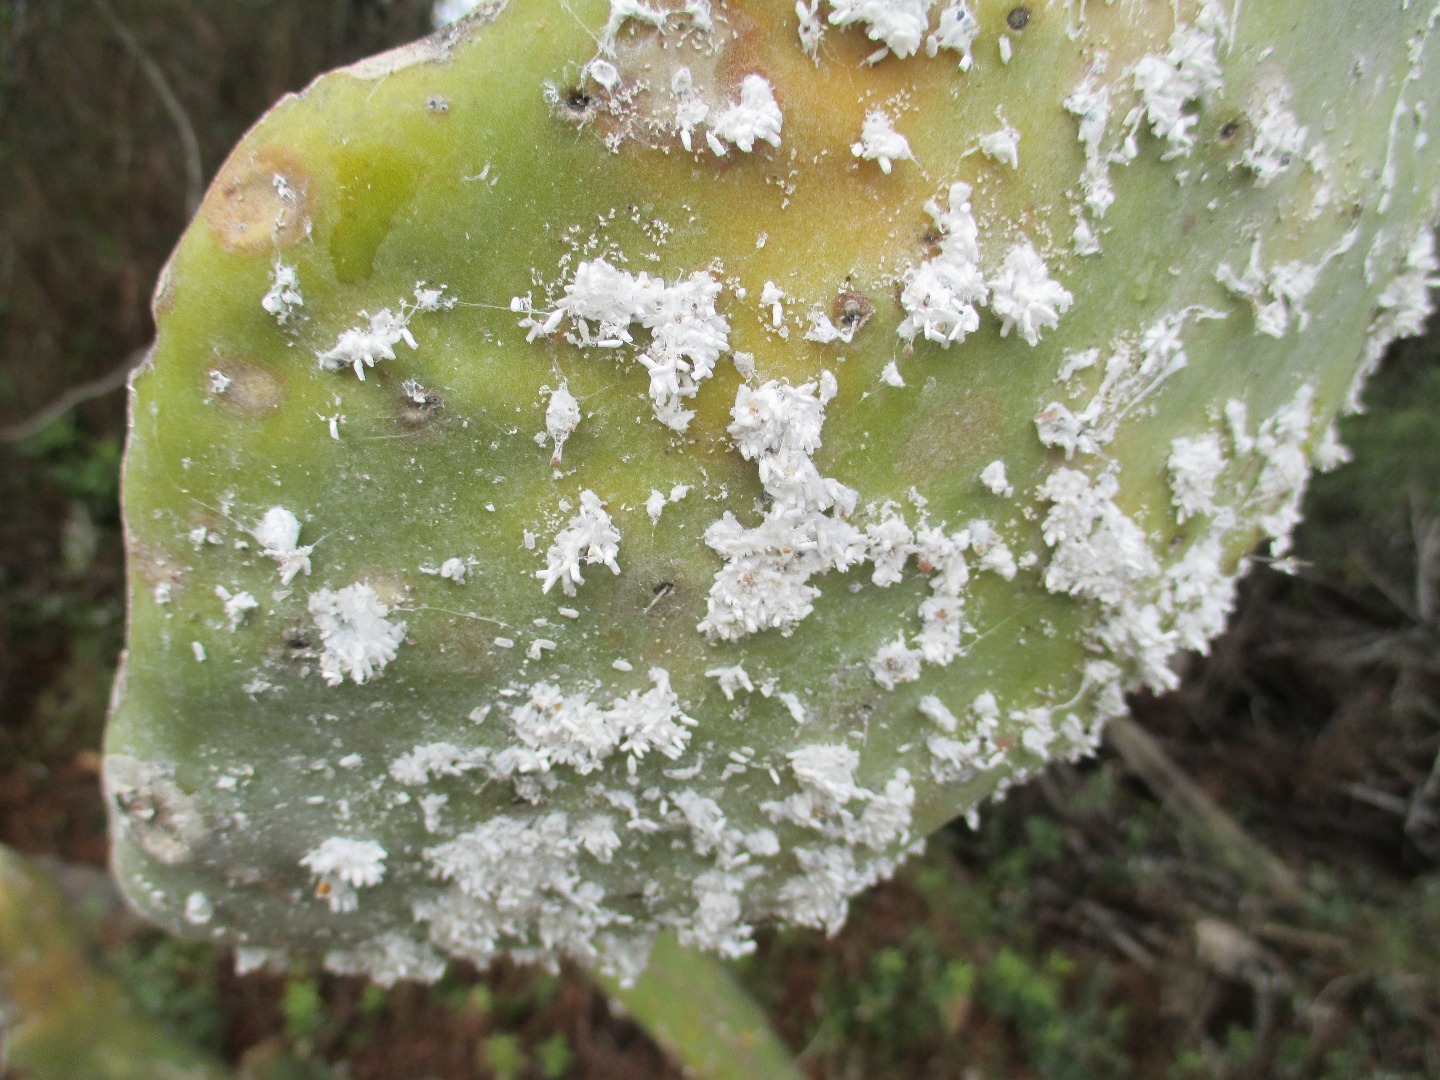 Woolly Aphid Damage to Plants